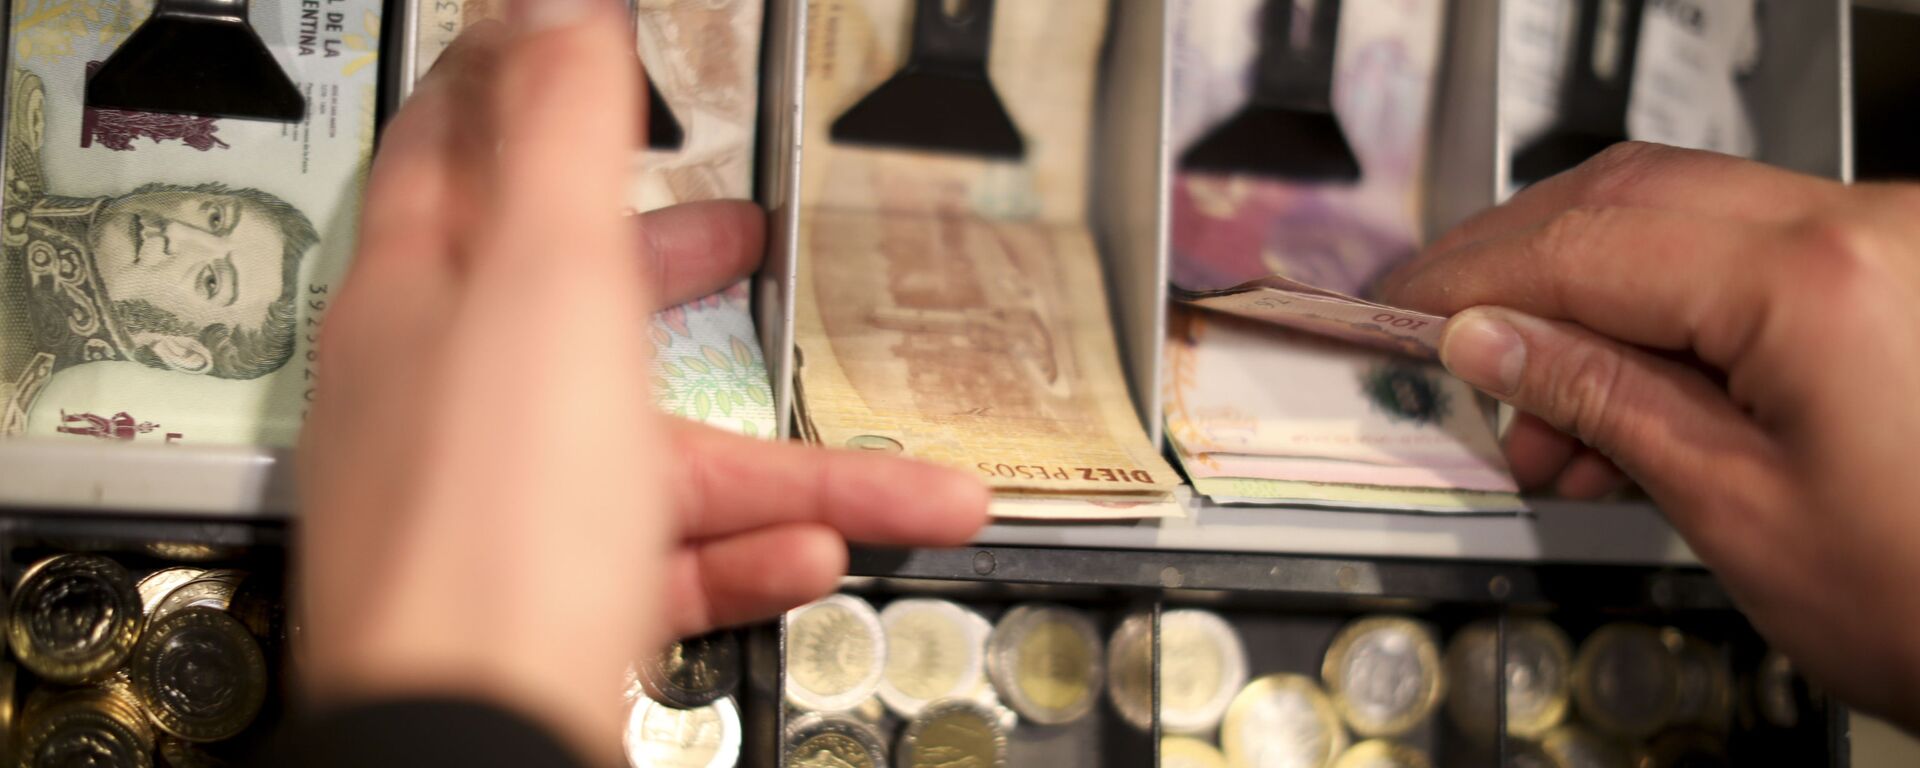 A man holds a 100 peso bill in the cashier of a restaurant in Buenos Aires, Argentina, Wednesday, Aug. 14, 2019. President Mauricio Macri announced economic relief for poor and working-class Argentines that include an increased minimum wage, reduced payroll taxes, a bonus for informal workers and a freeze in gasoline prices. The conservative leader said Wednesday he's acting in recognition of the anger Argentines expressed in Sunday's primary election, when Macri trailed his populist rival by 15 percentage points. - Sputnik International, 1920, 20.11.2023